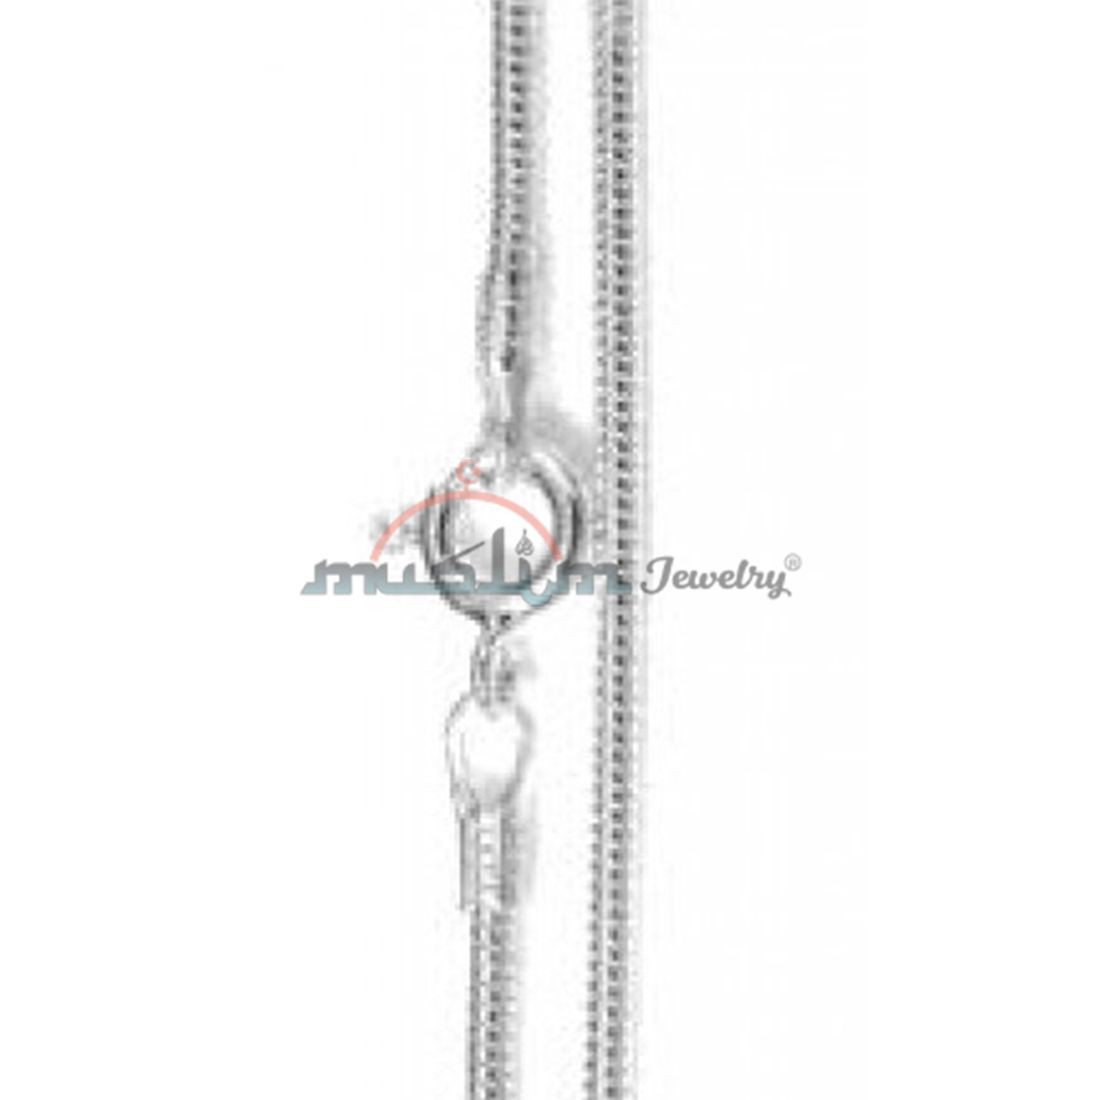 High Quality Sterling Silver Shiny 40 gauge Round Snake Chain Jewelry Necklace